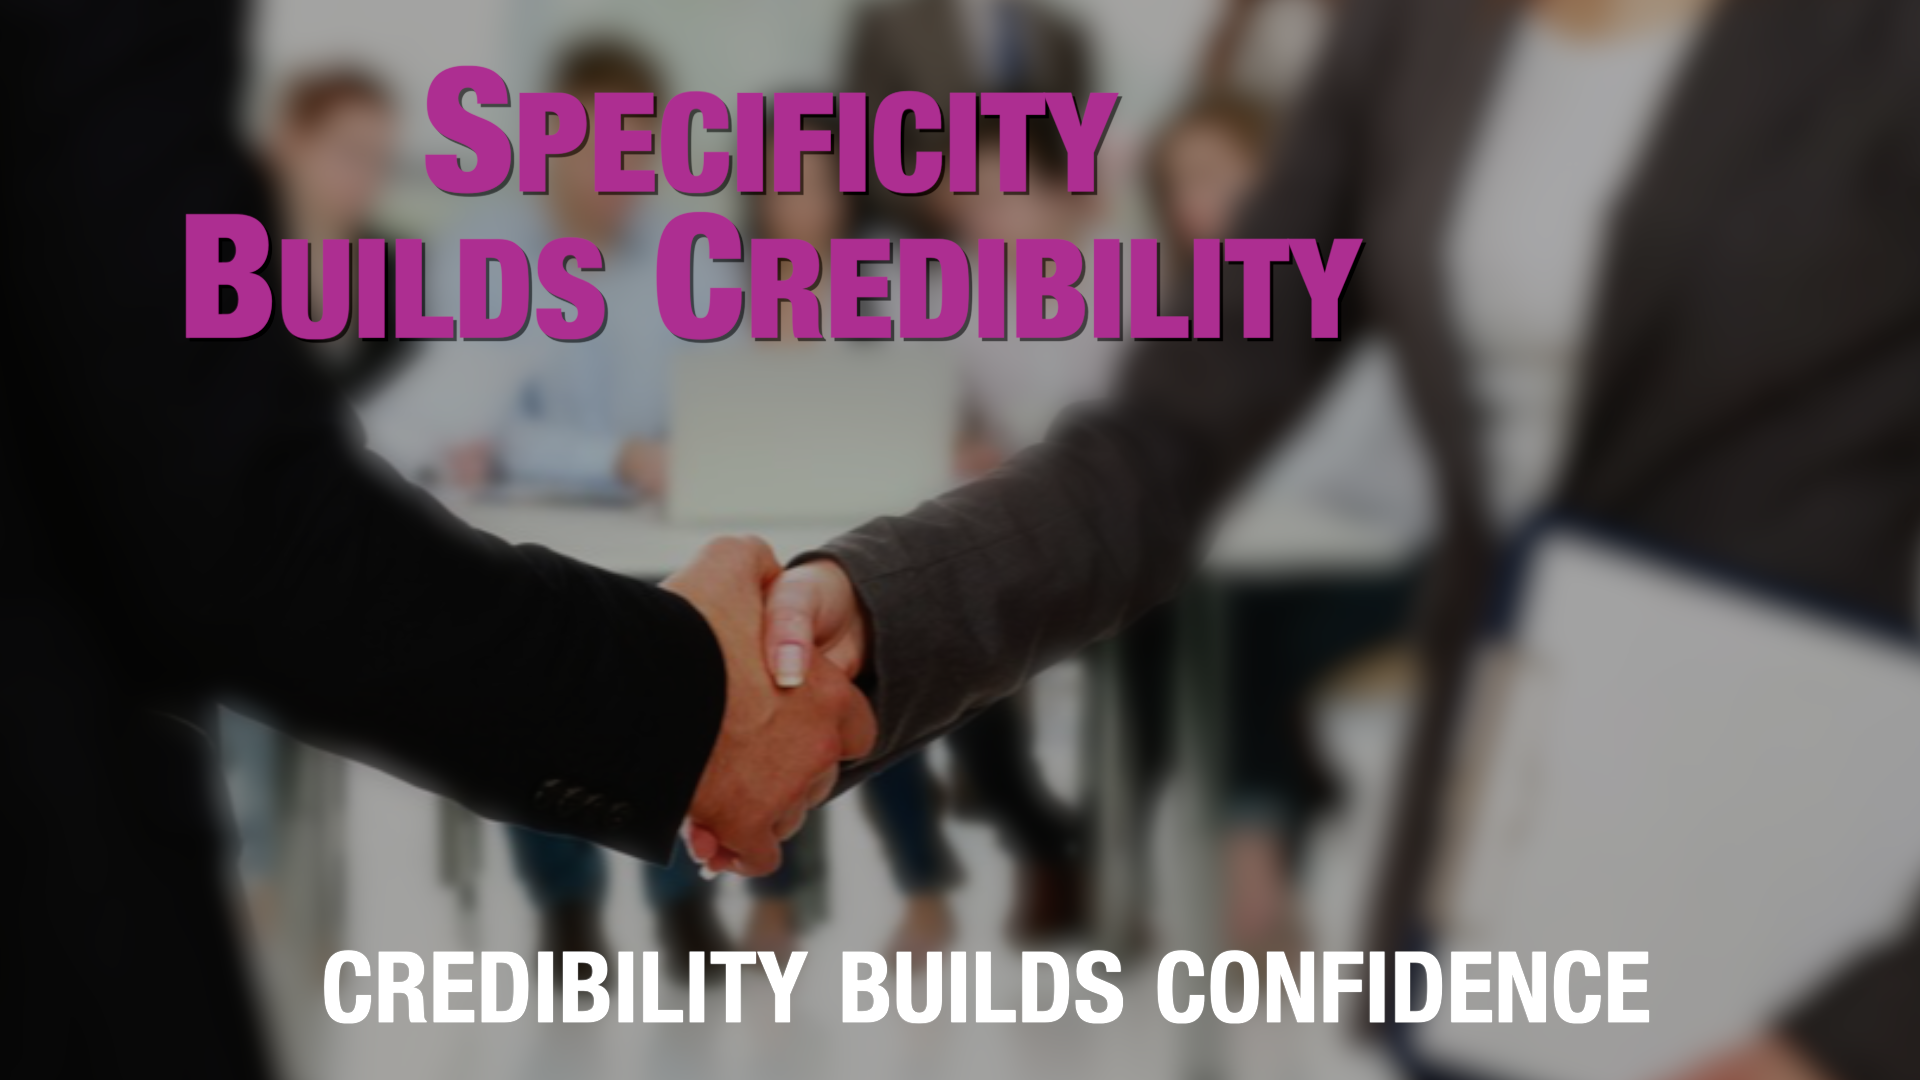 Specificity builds credibility